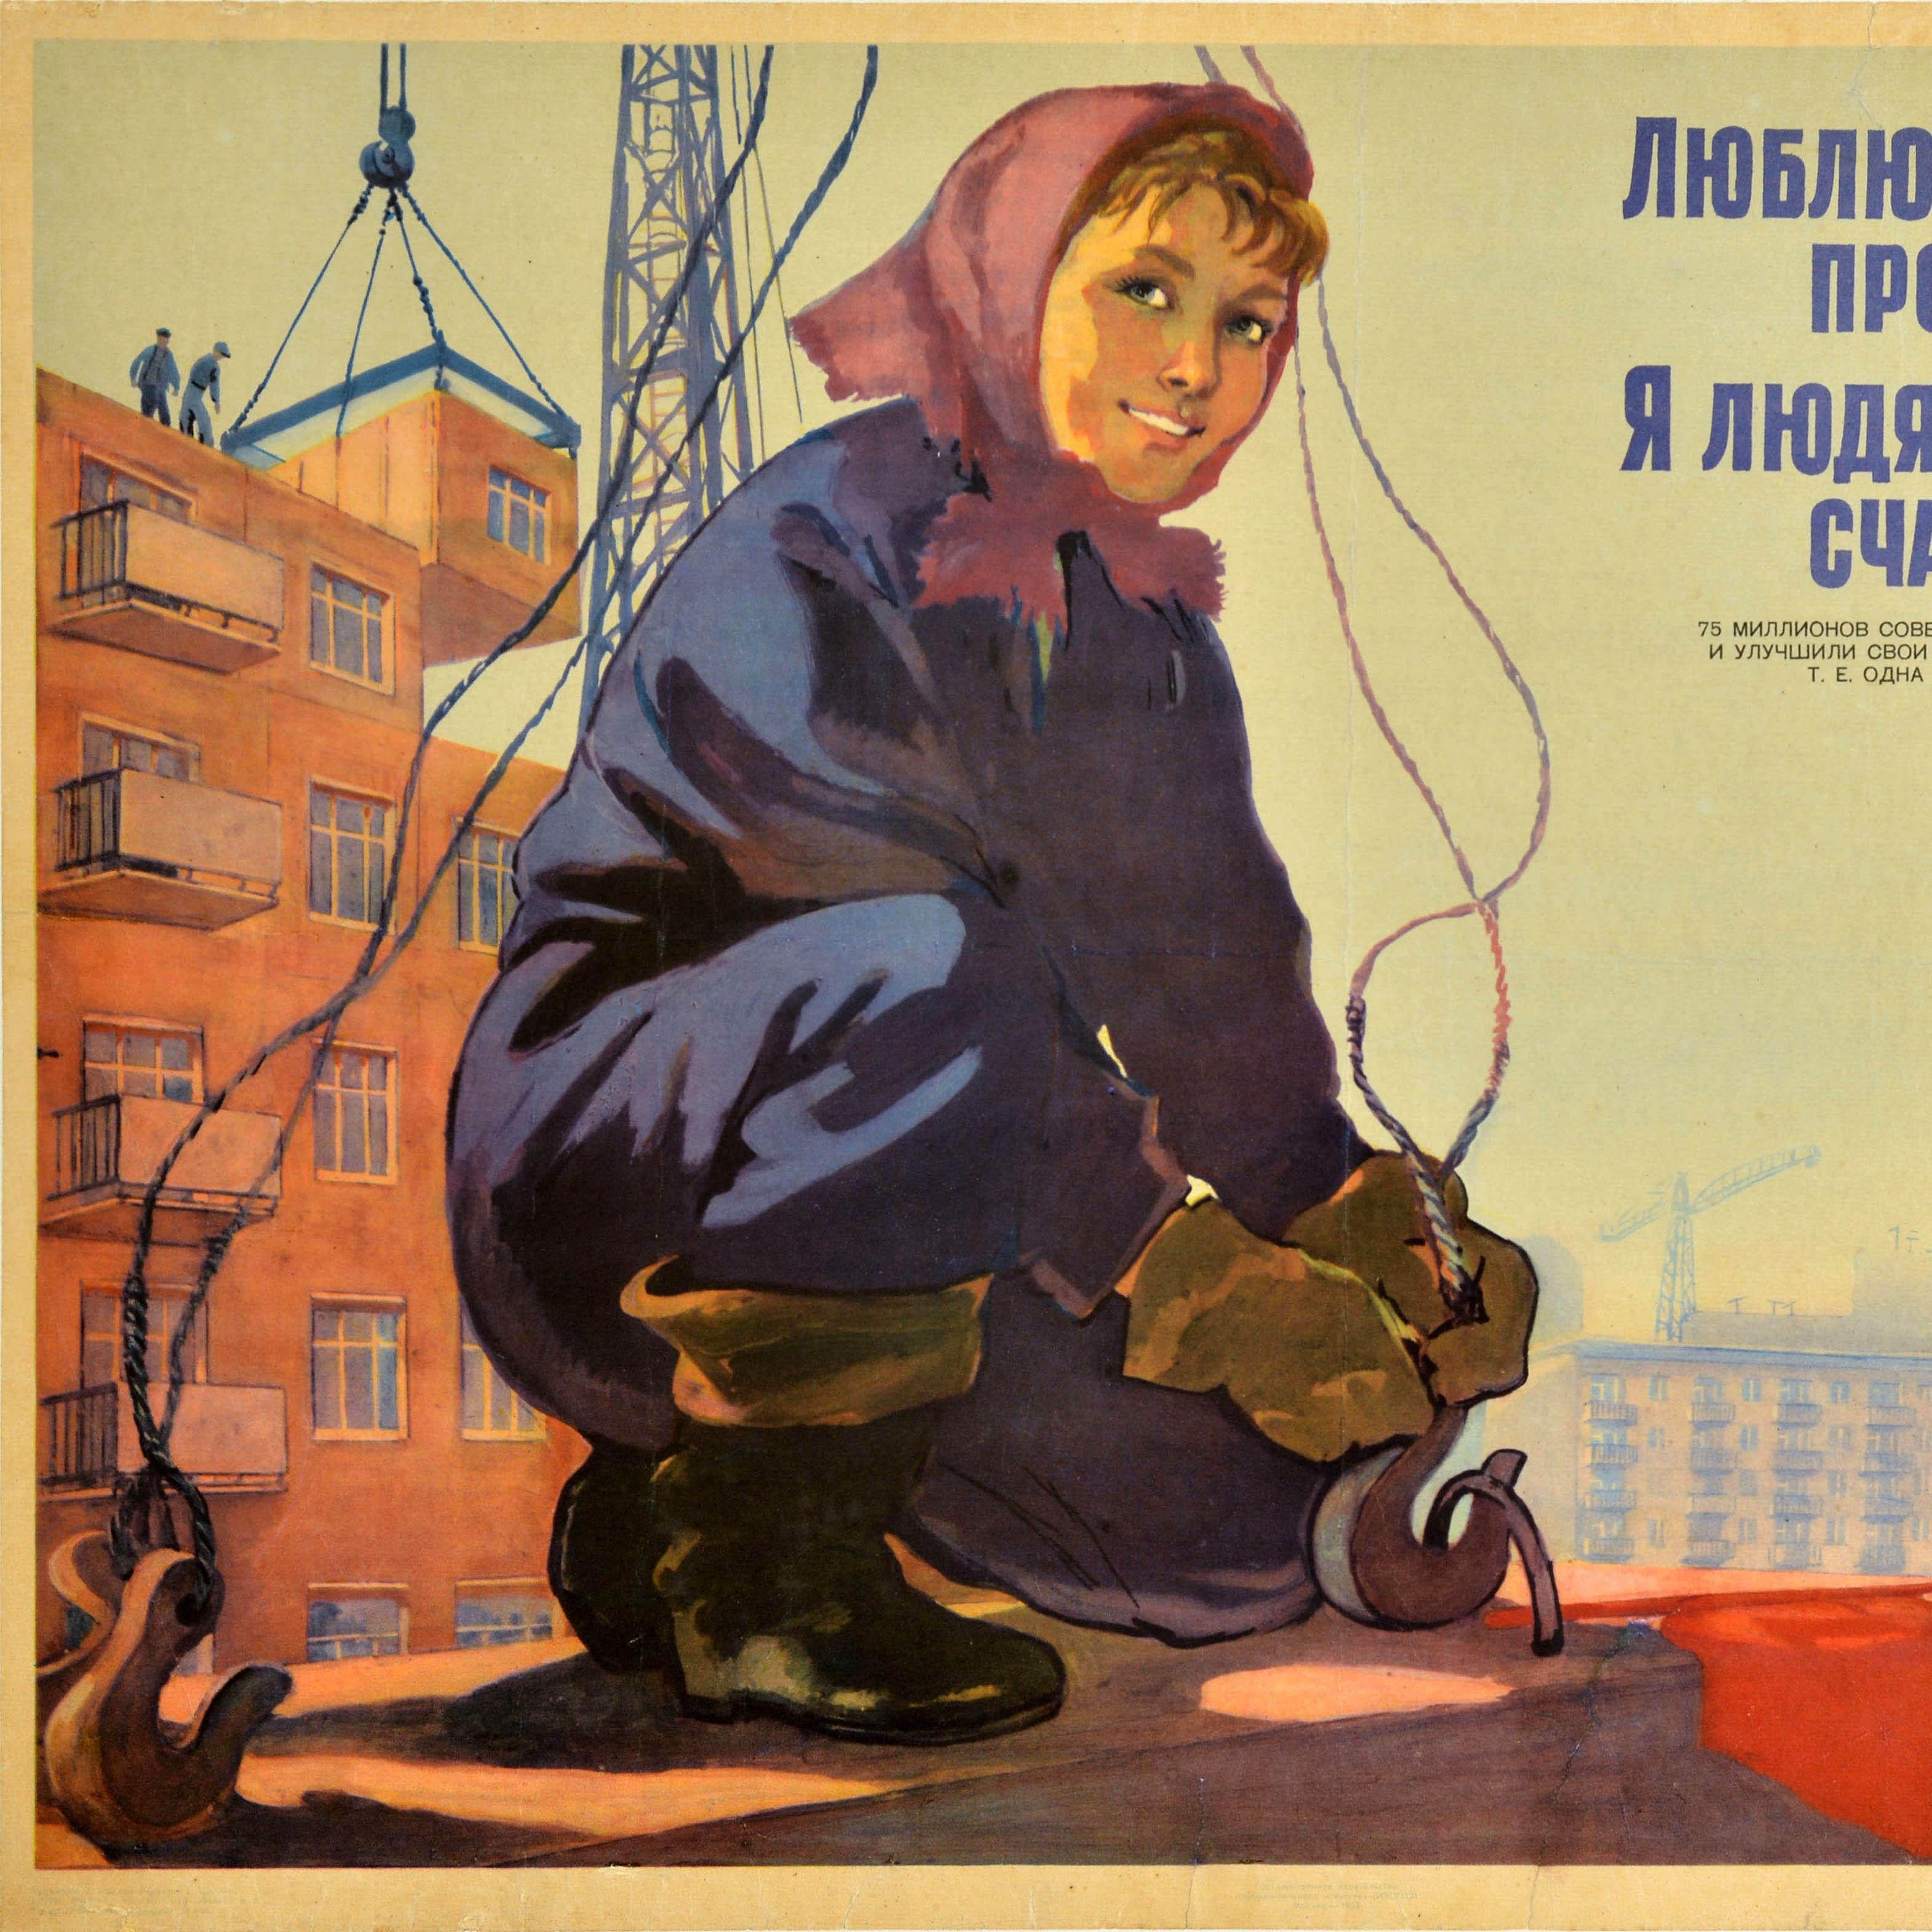 Original vintage Soviet propaganda poster - I love my profession I create happiness for people! 75 million Soviet people celebrated their house warming and improved their living conditions in 1957-1962 i.e. one third of our population - featuring an